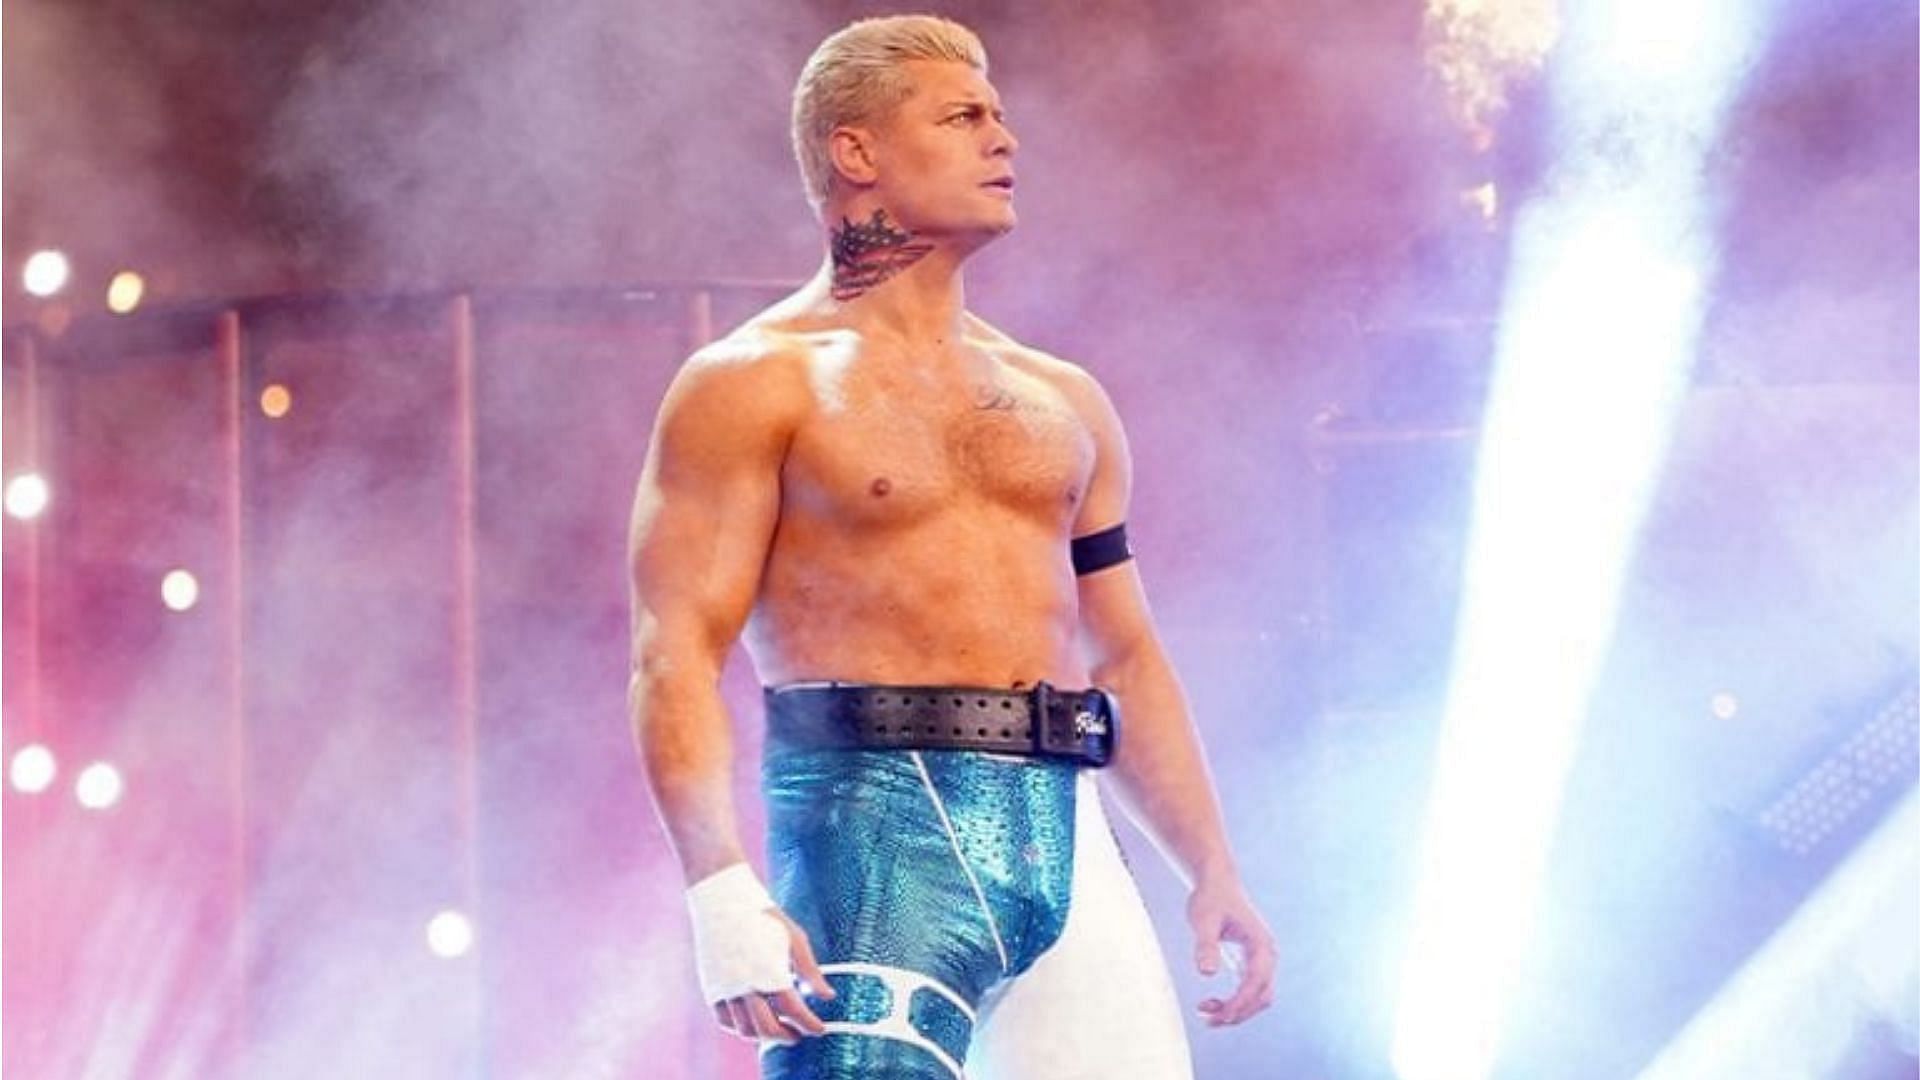 Cody Rhodes making his entrance during his time with AEW